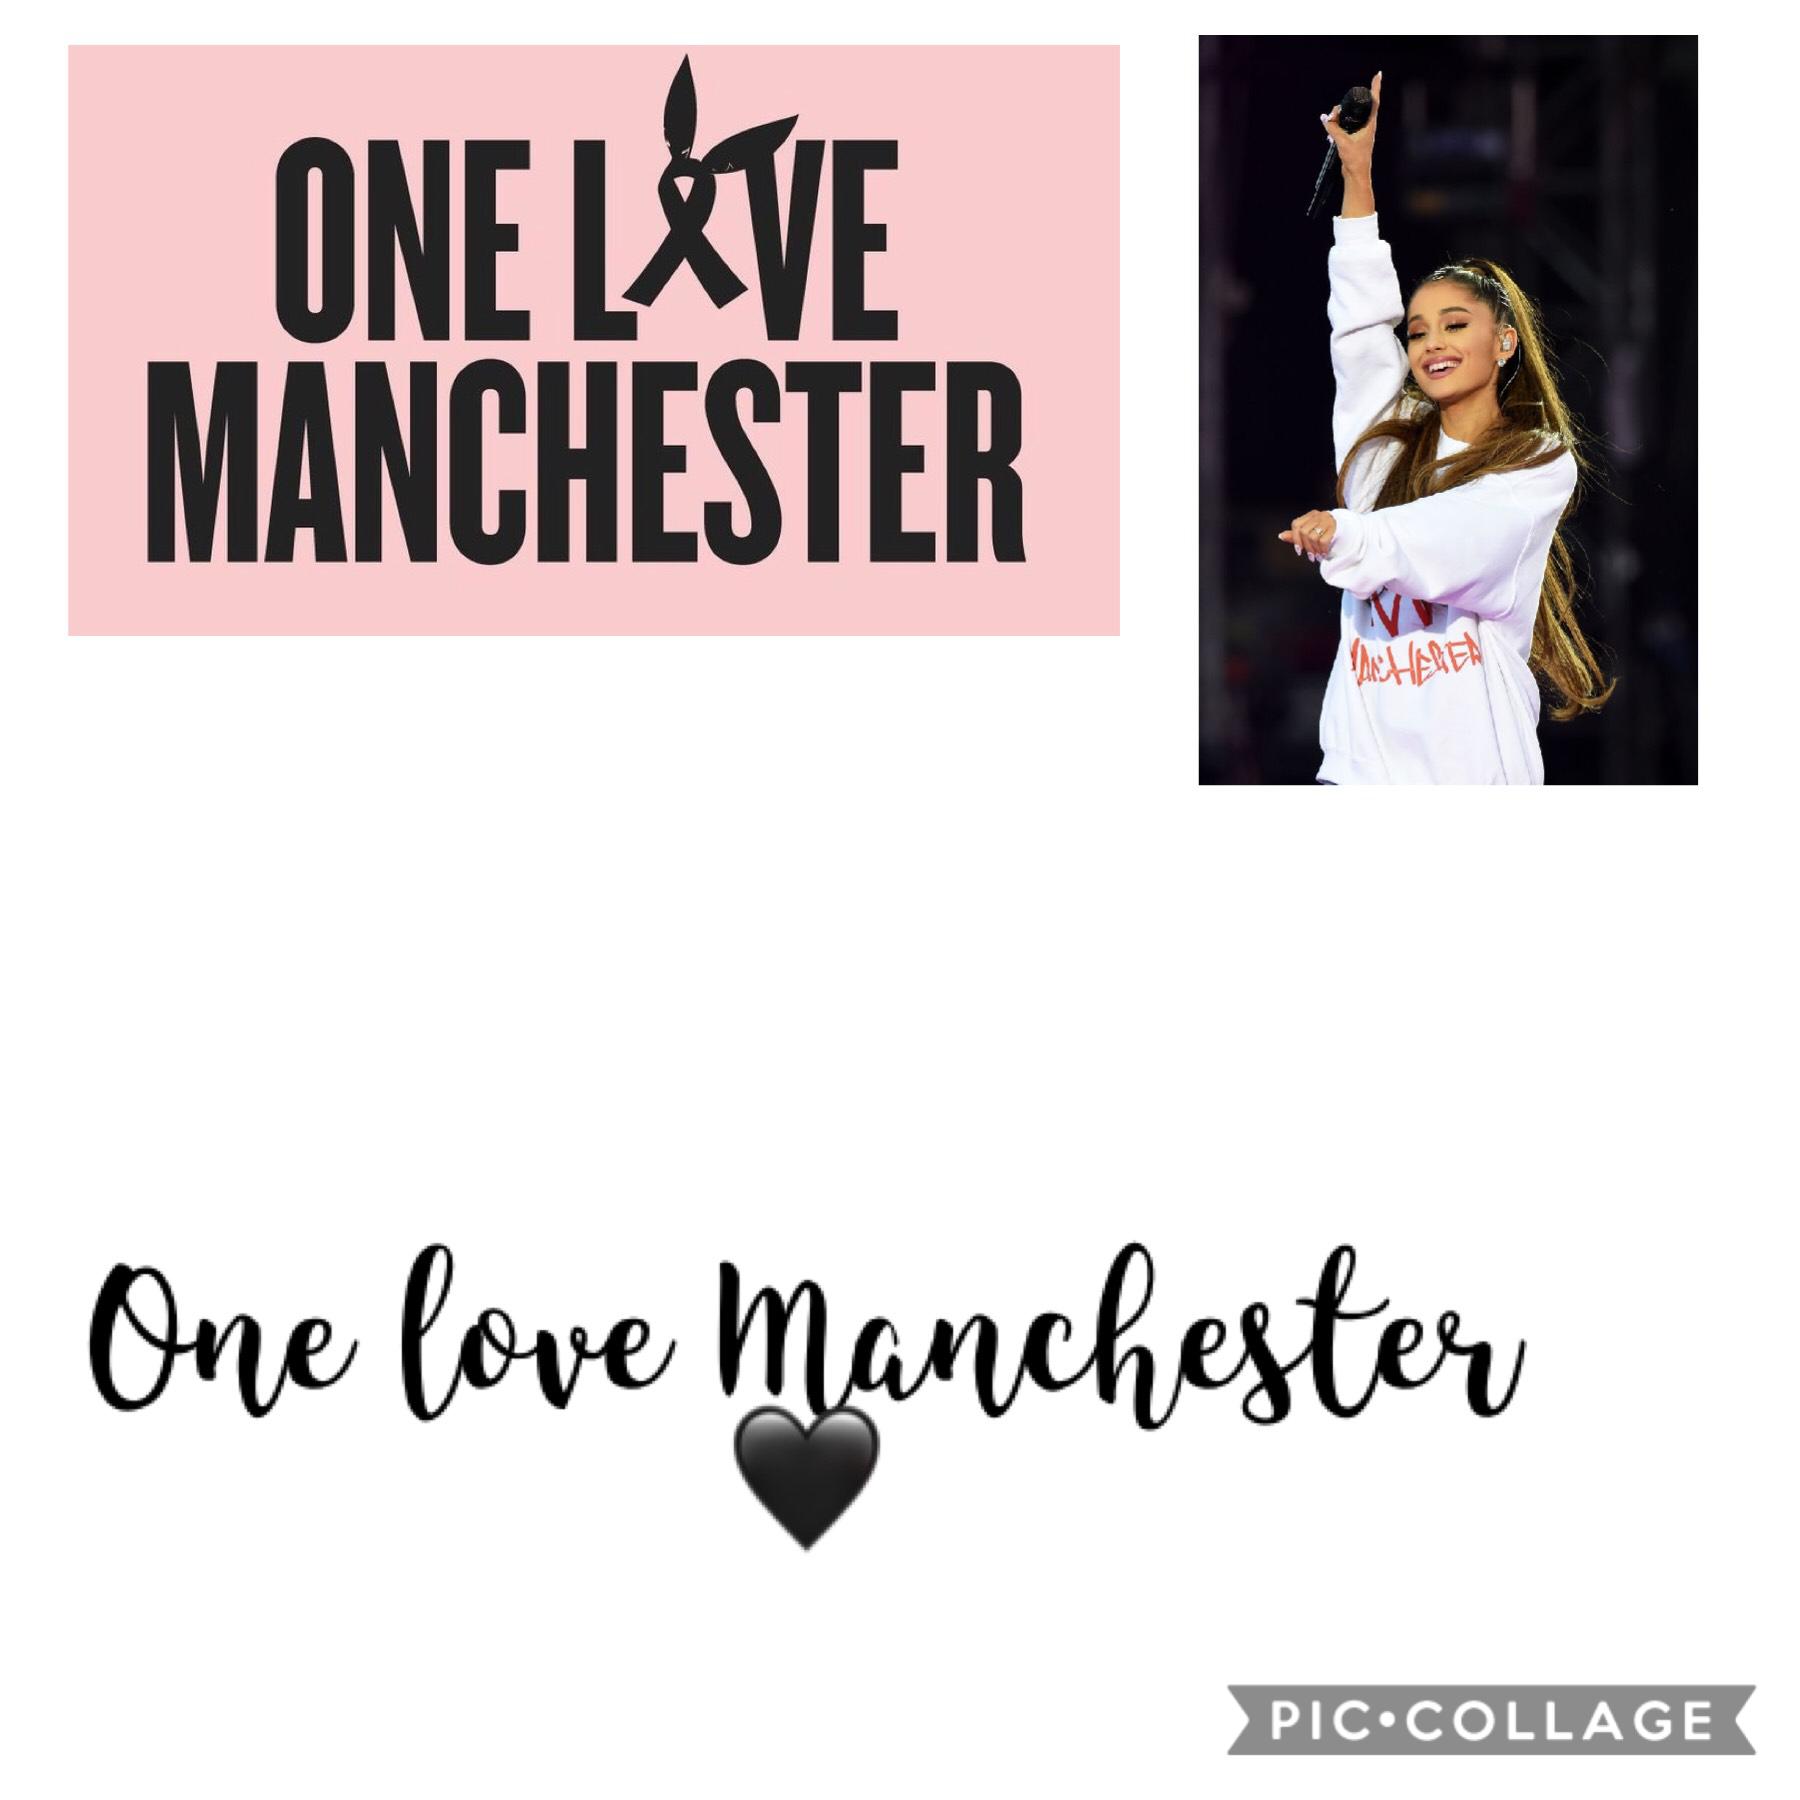 Sorry I didn’t post about this I was just busy! 
Remember those angels 
Ariana is so strong 
One love Manchester 